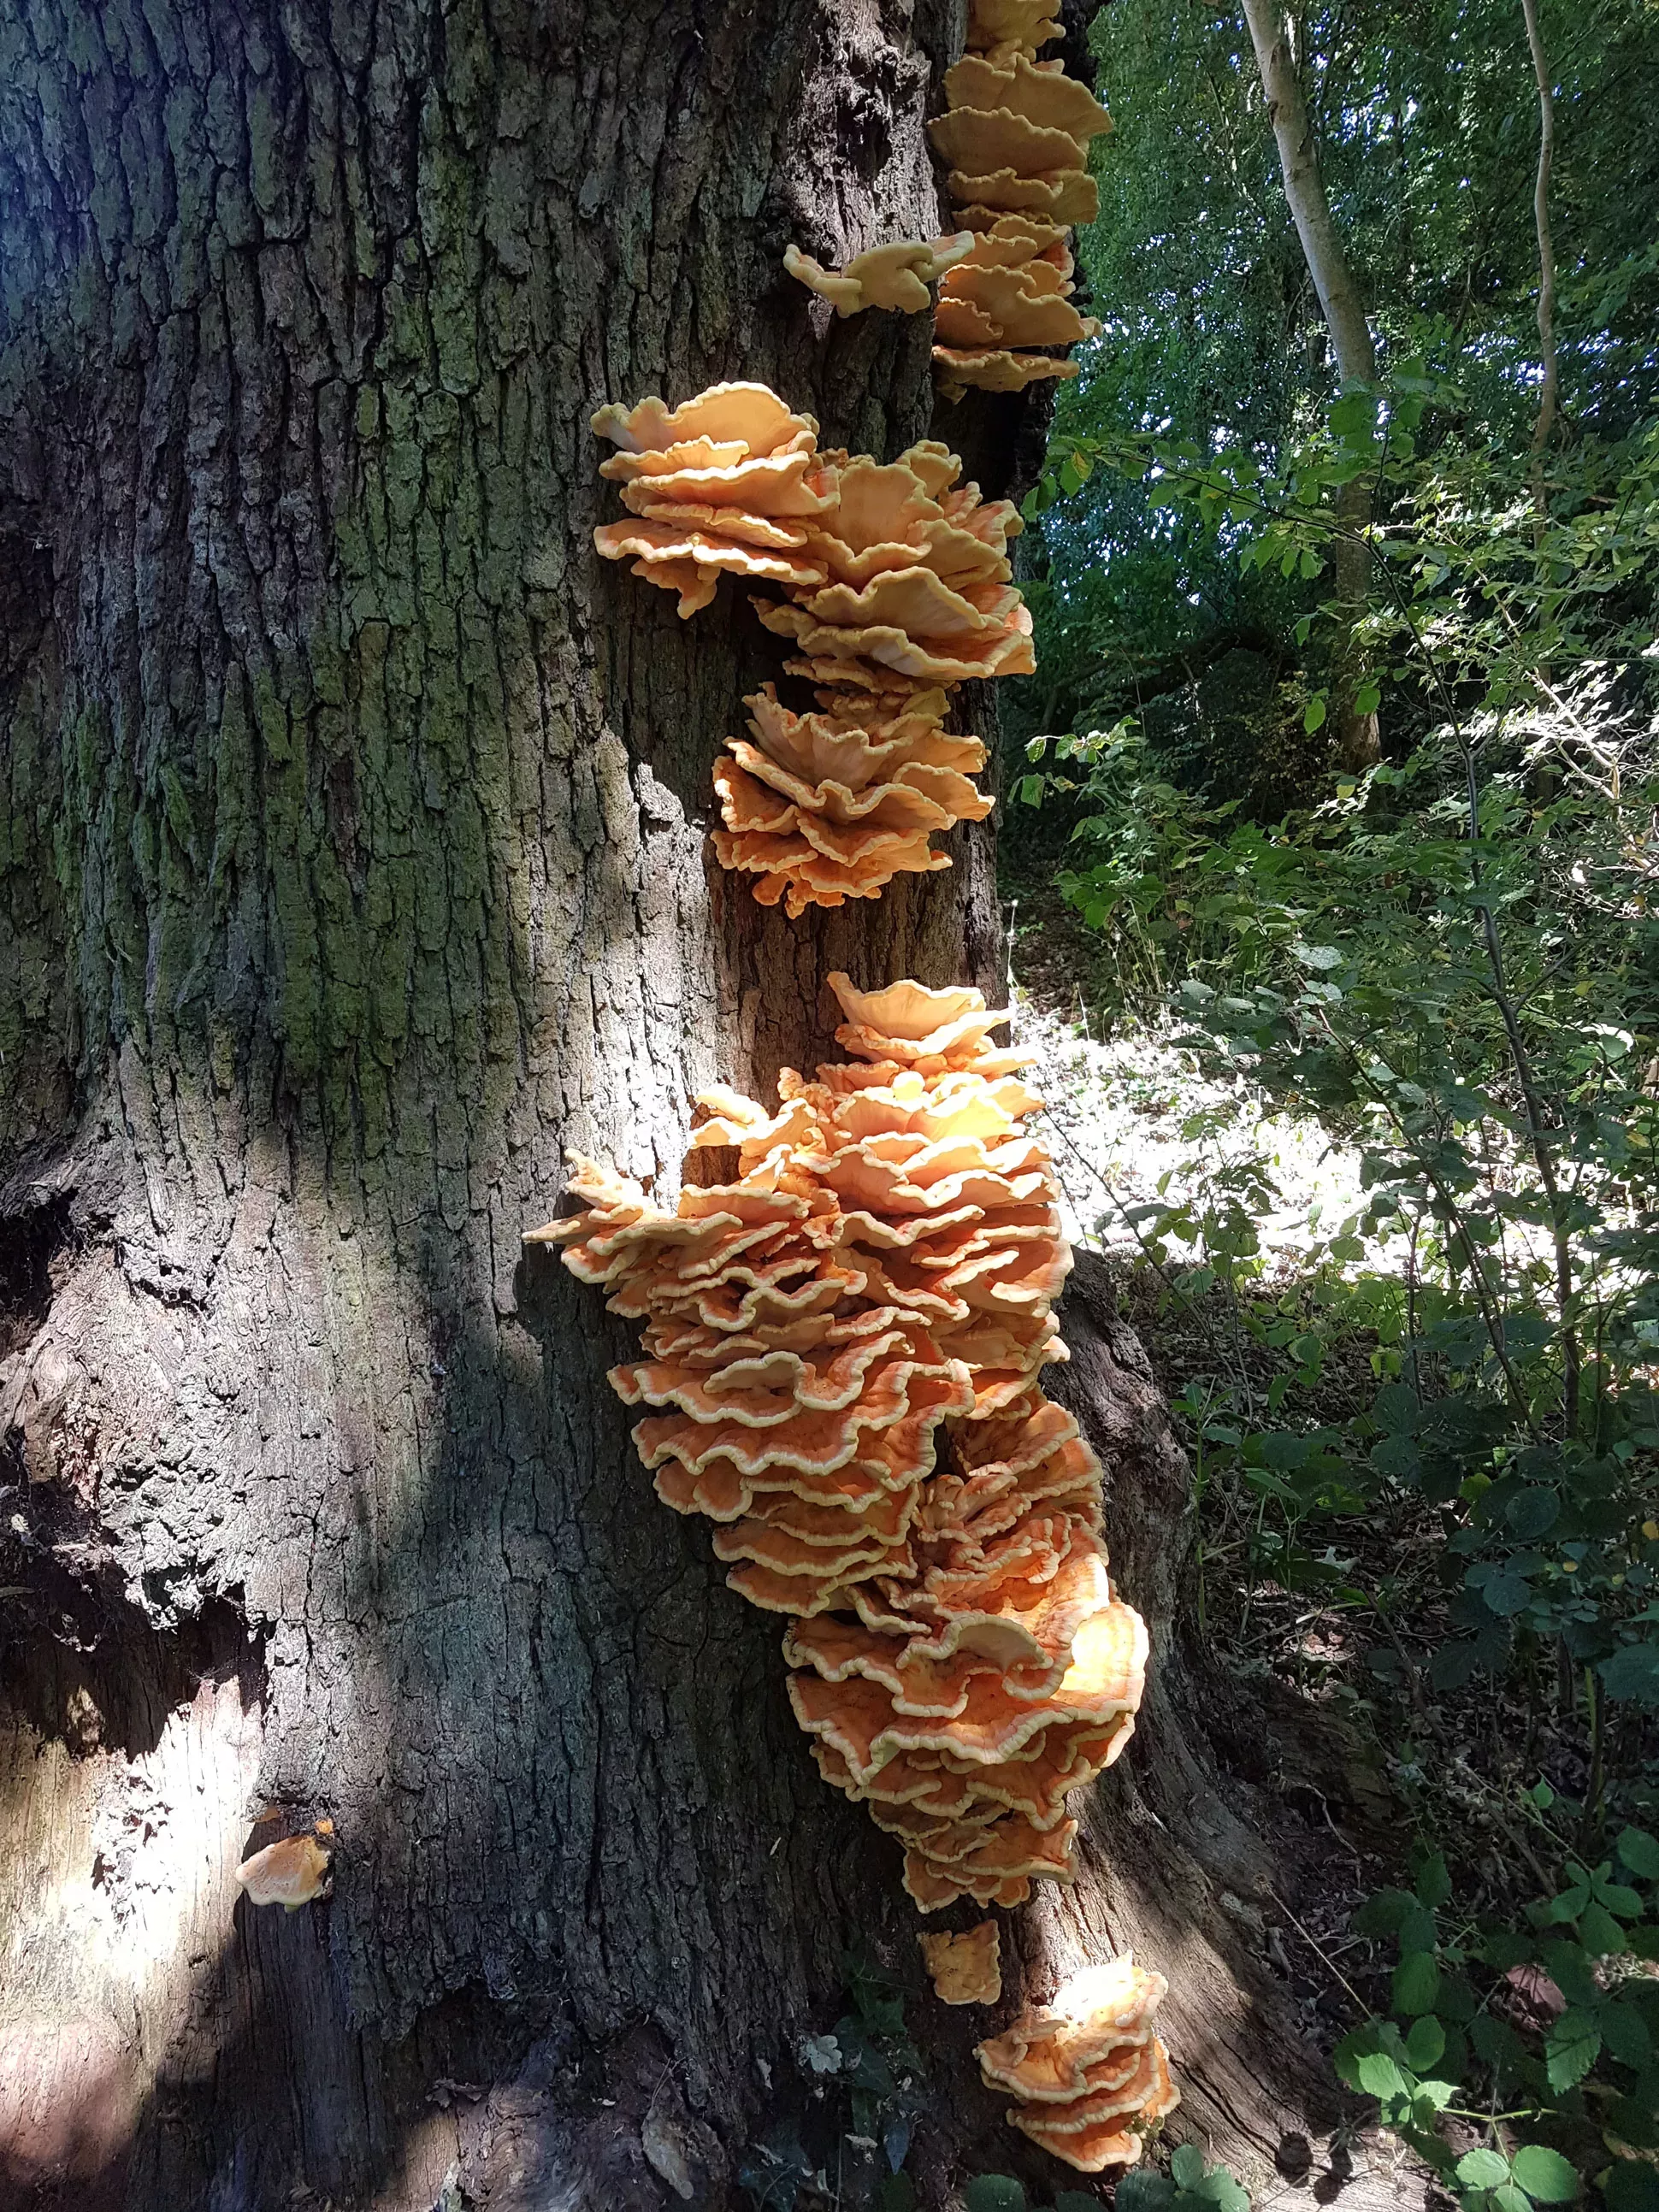 Several orange yellow shelf structures of Laetiporus sulphureus growing up the side of a tree. The sun is shining through the woodland